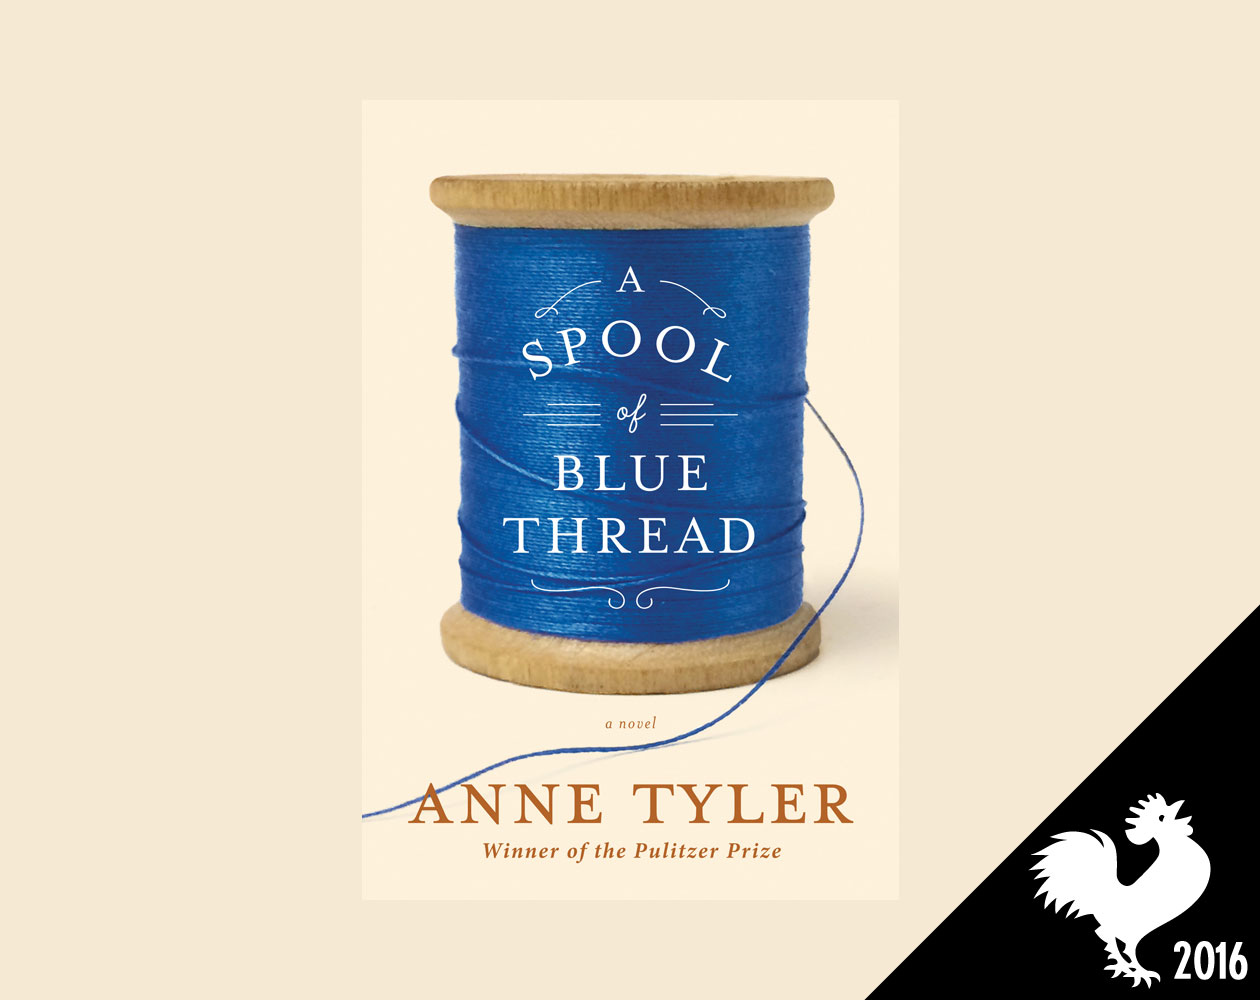 COMMENT: Review: A Spool of Blue Thread by Anne Tyler